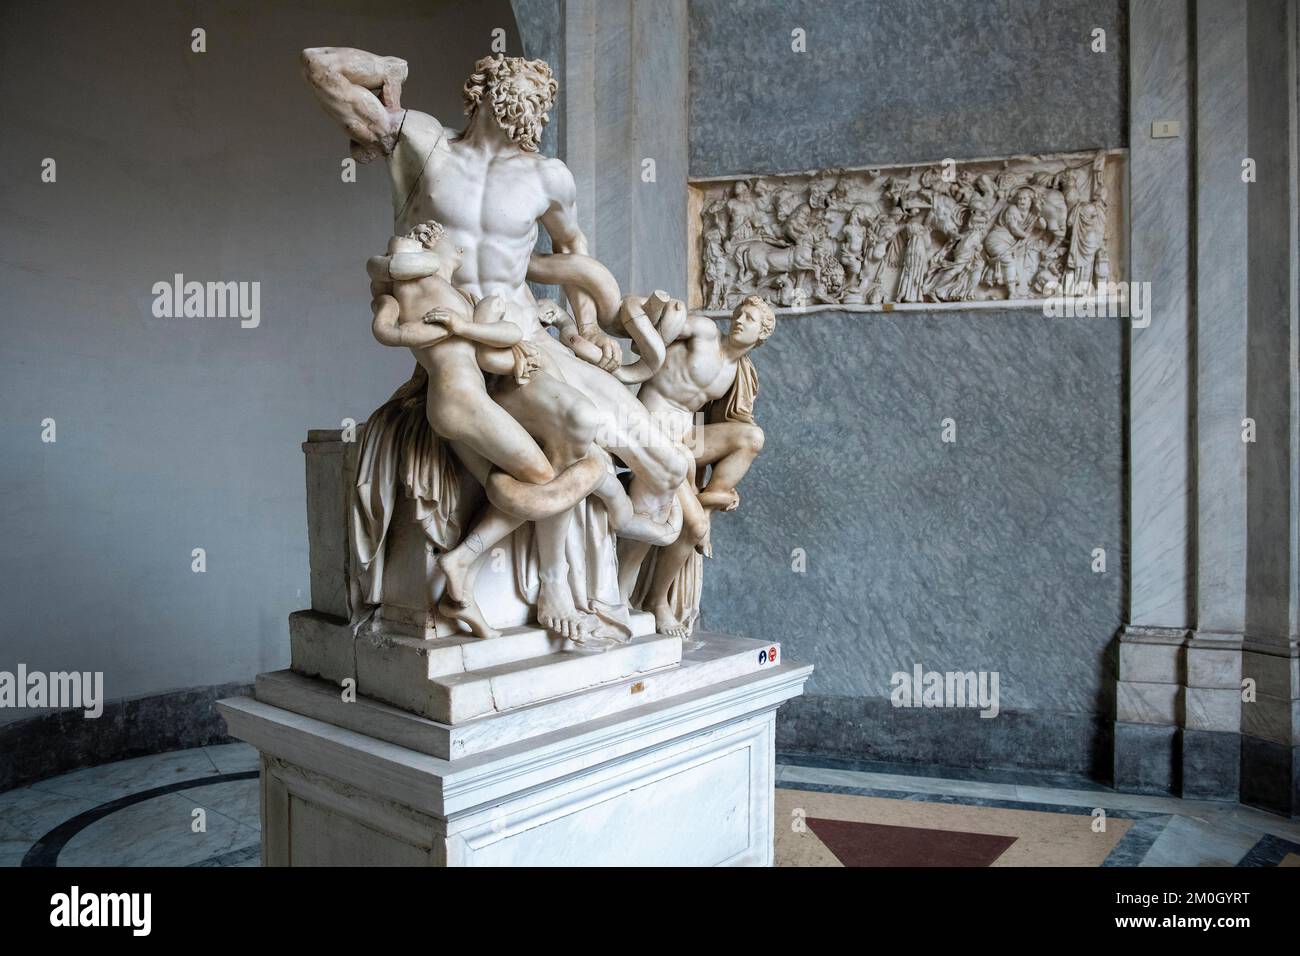 View from half left on historical sculpture in marble Marble sculpture by ancient sculptor Laocoon Group of priest Laocoon and sons fighting battle wi Stock Photo